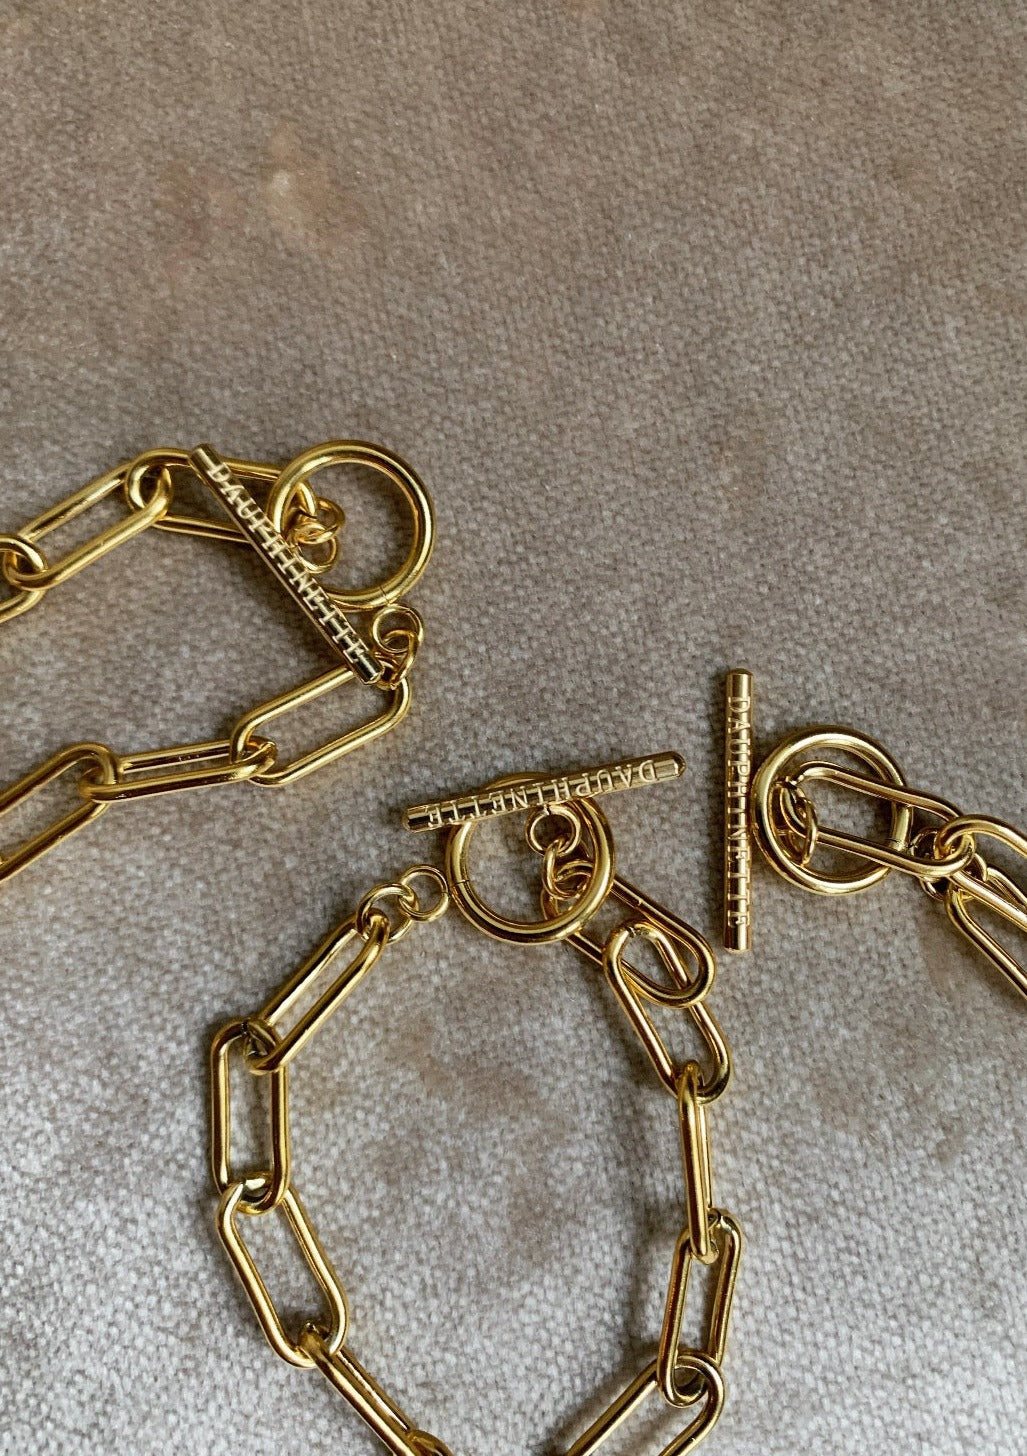 Gold-plated stainless steel Albert chain.